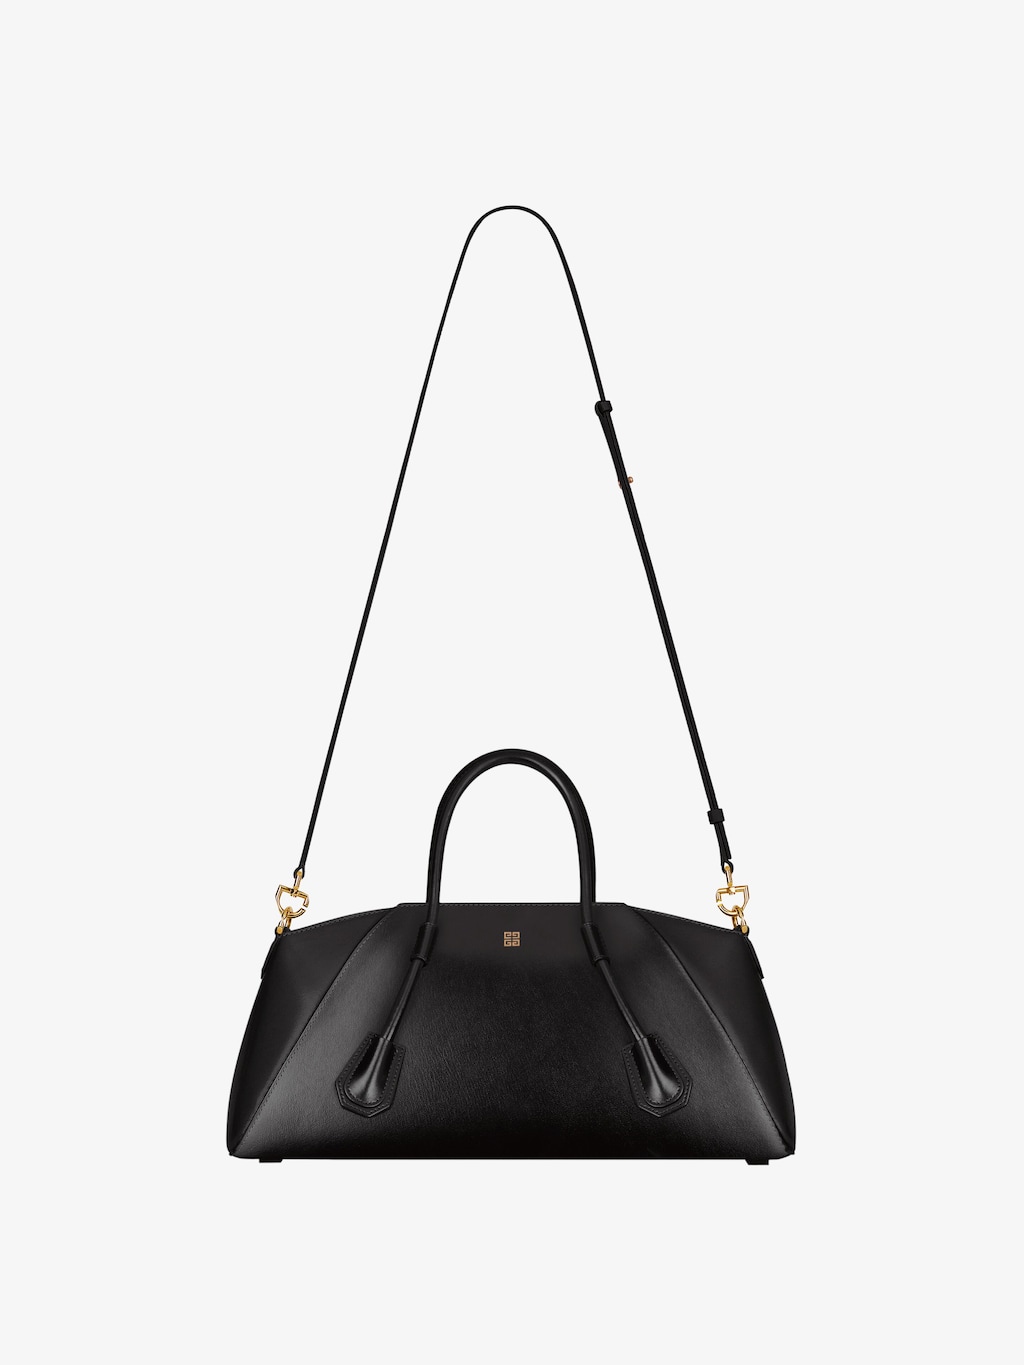 Small Antigona Stretch bag in box leather by Givenchy, available on givenchy.com for $2050 Kylie Jenner Bags Exact Product 